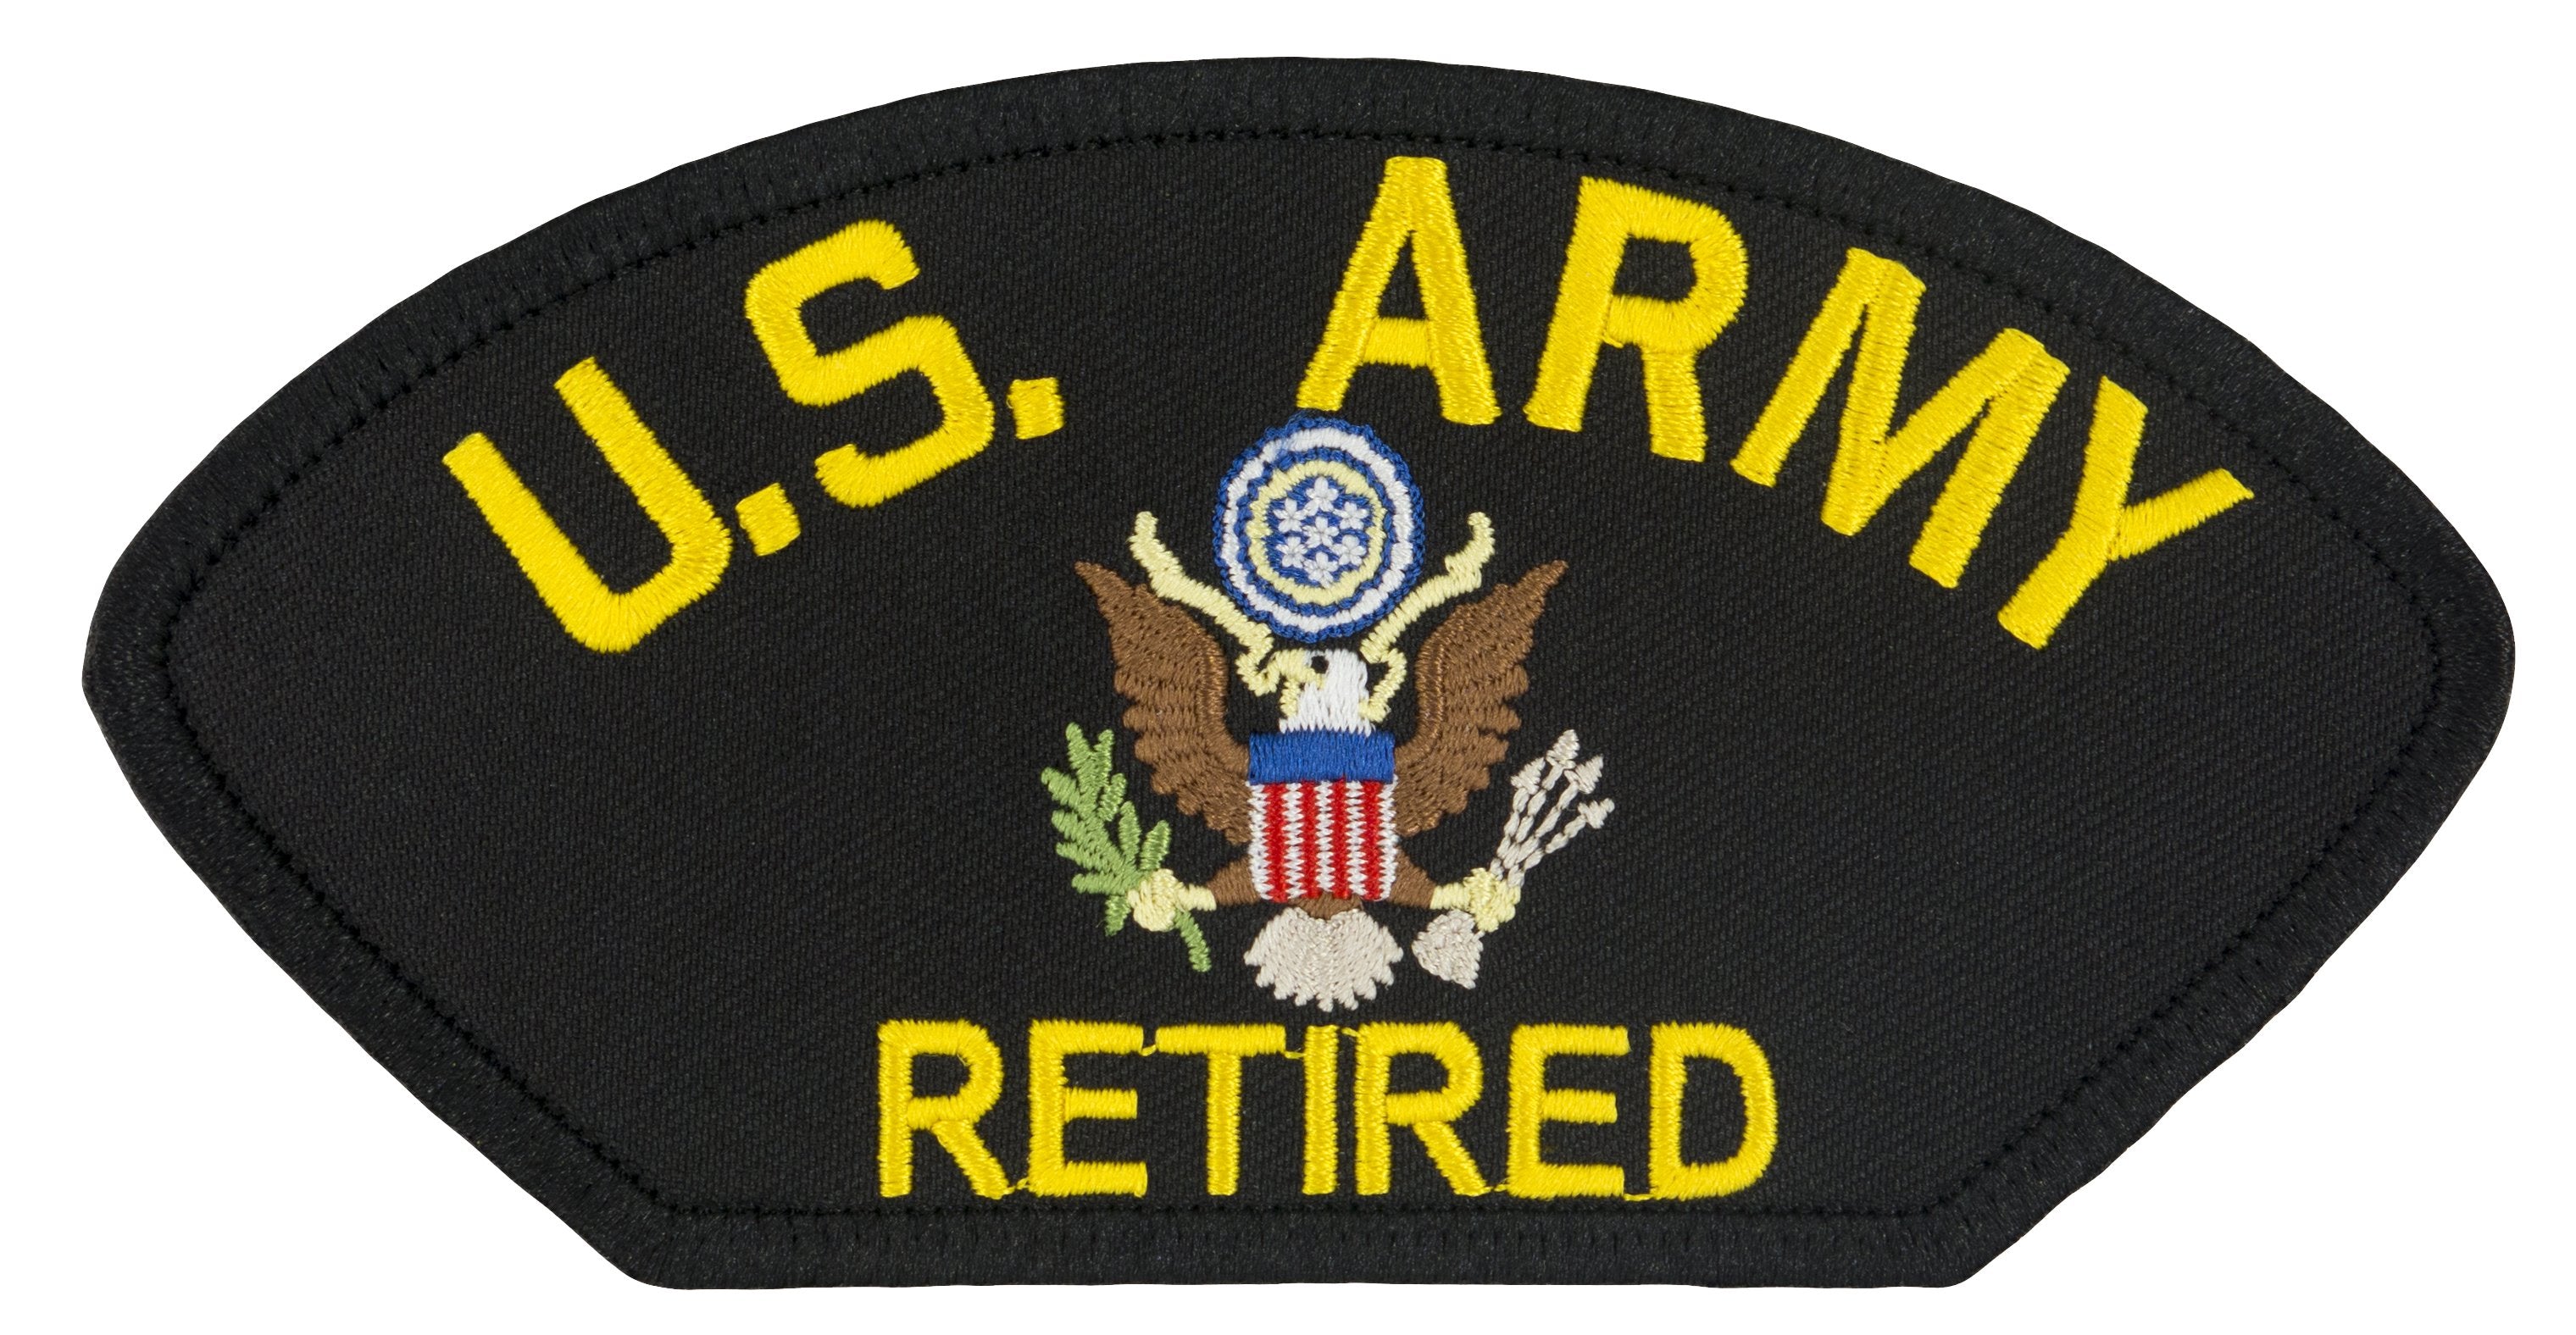 US Army Retired Embroidered Patch 5 3/16" x 2 5/8"